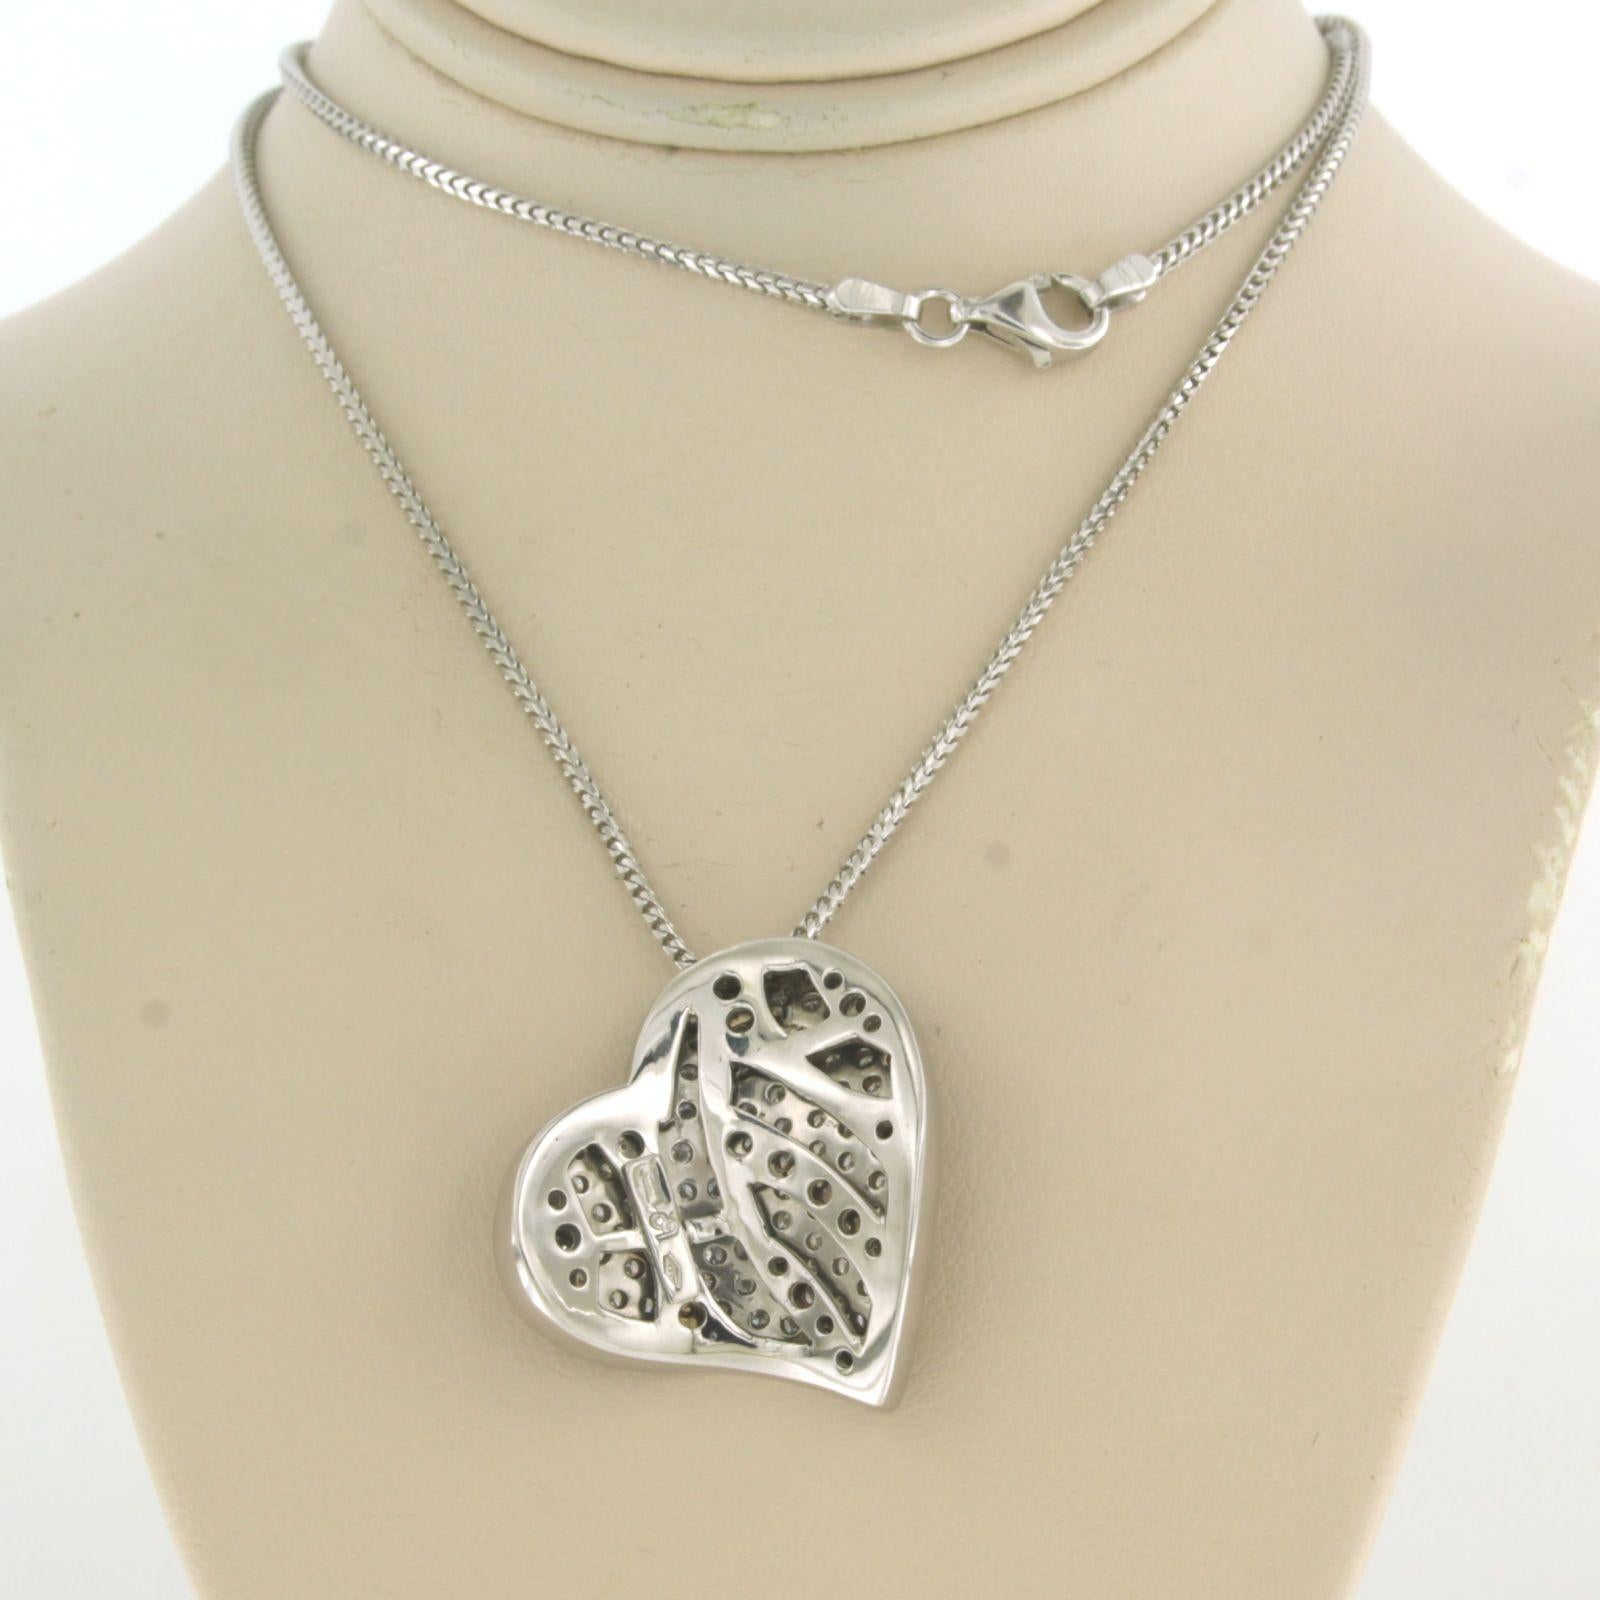 Women's Chain and pendant in shape of a heart set with diamonds 18k white gold For Sale